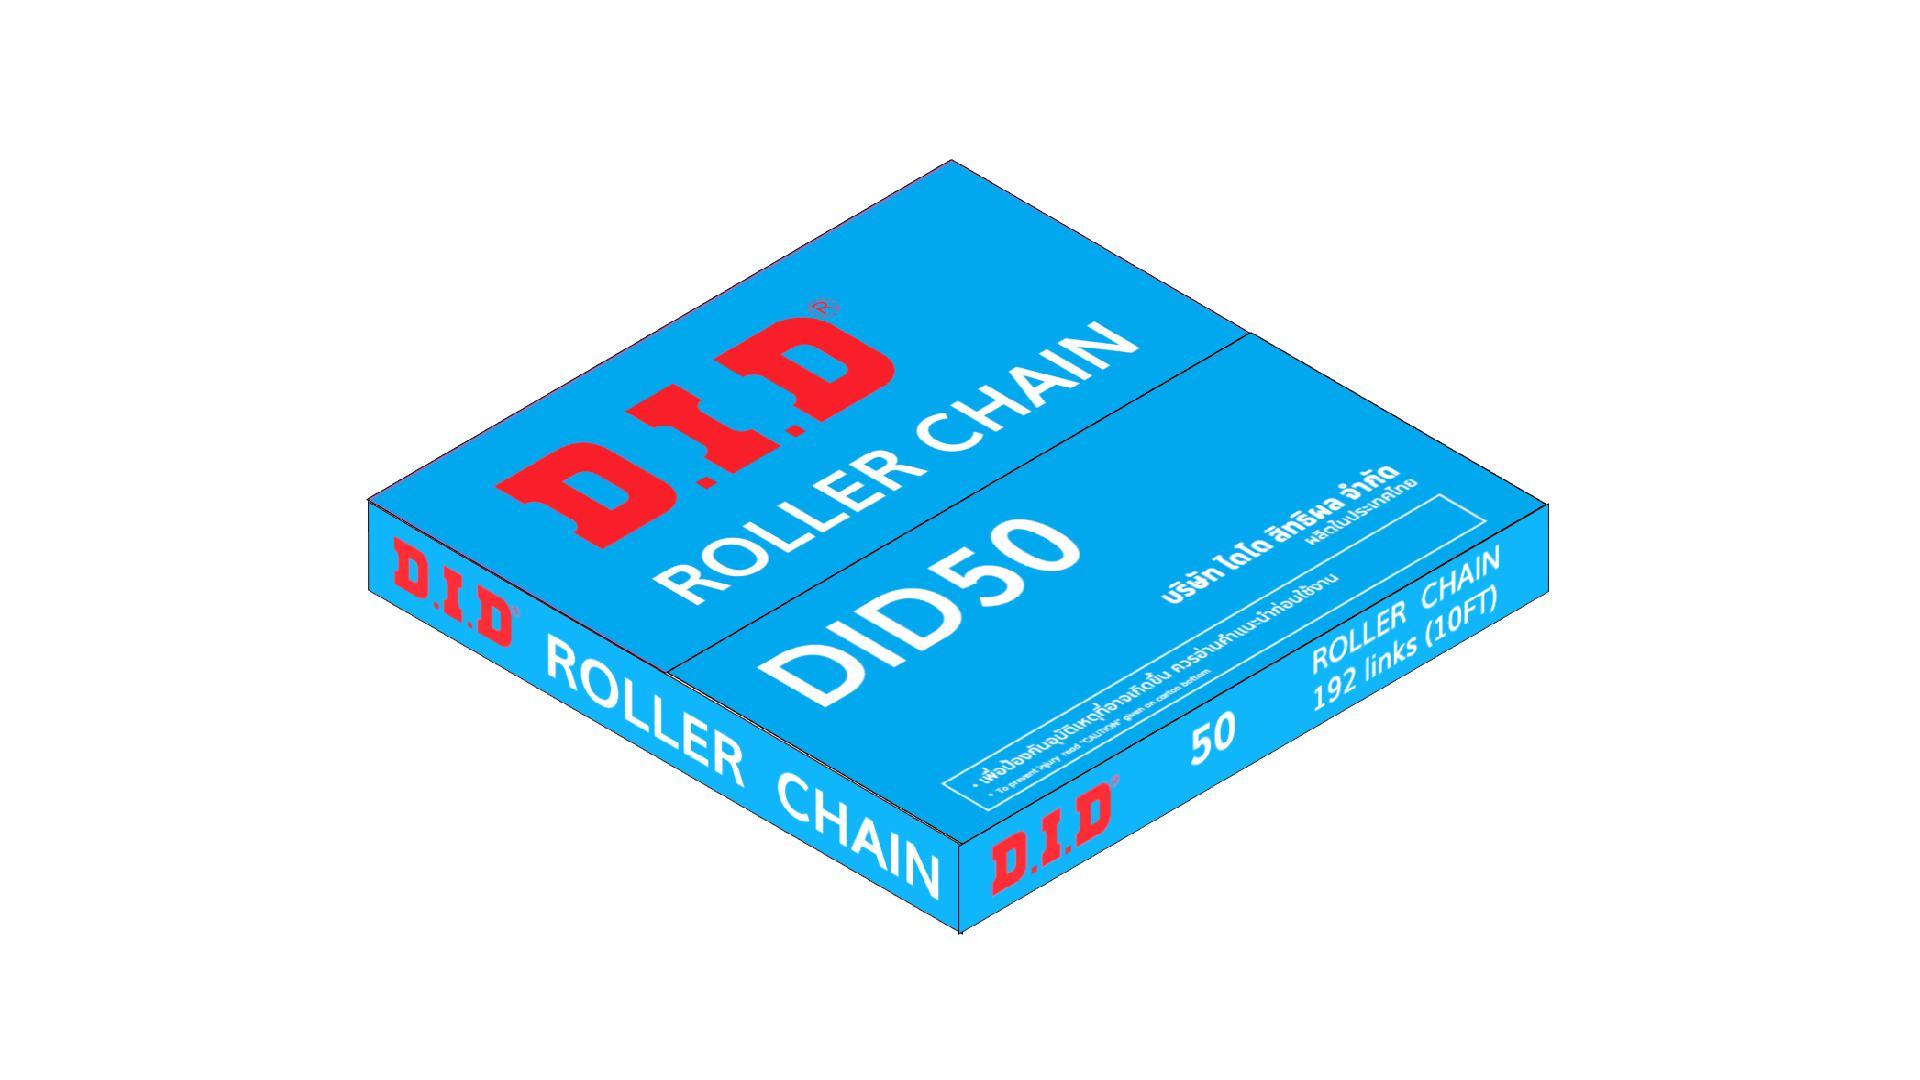 Roller chains for Power Transmission